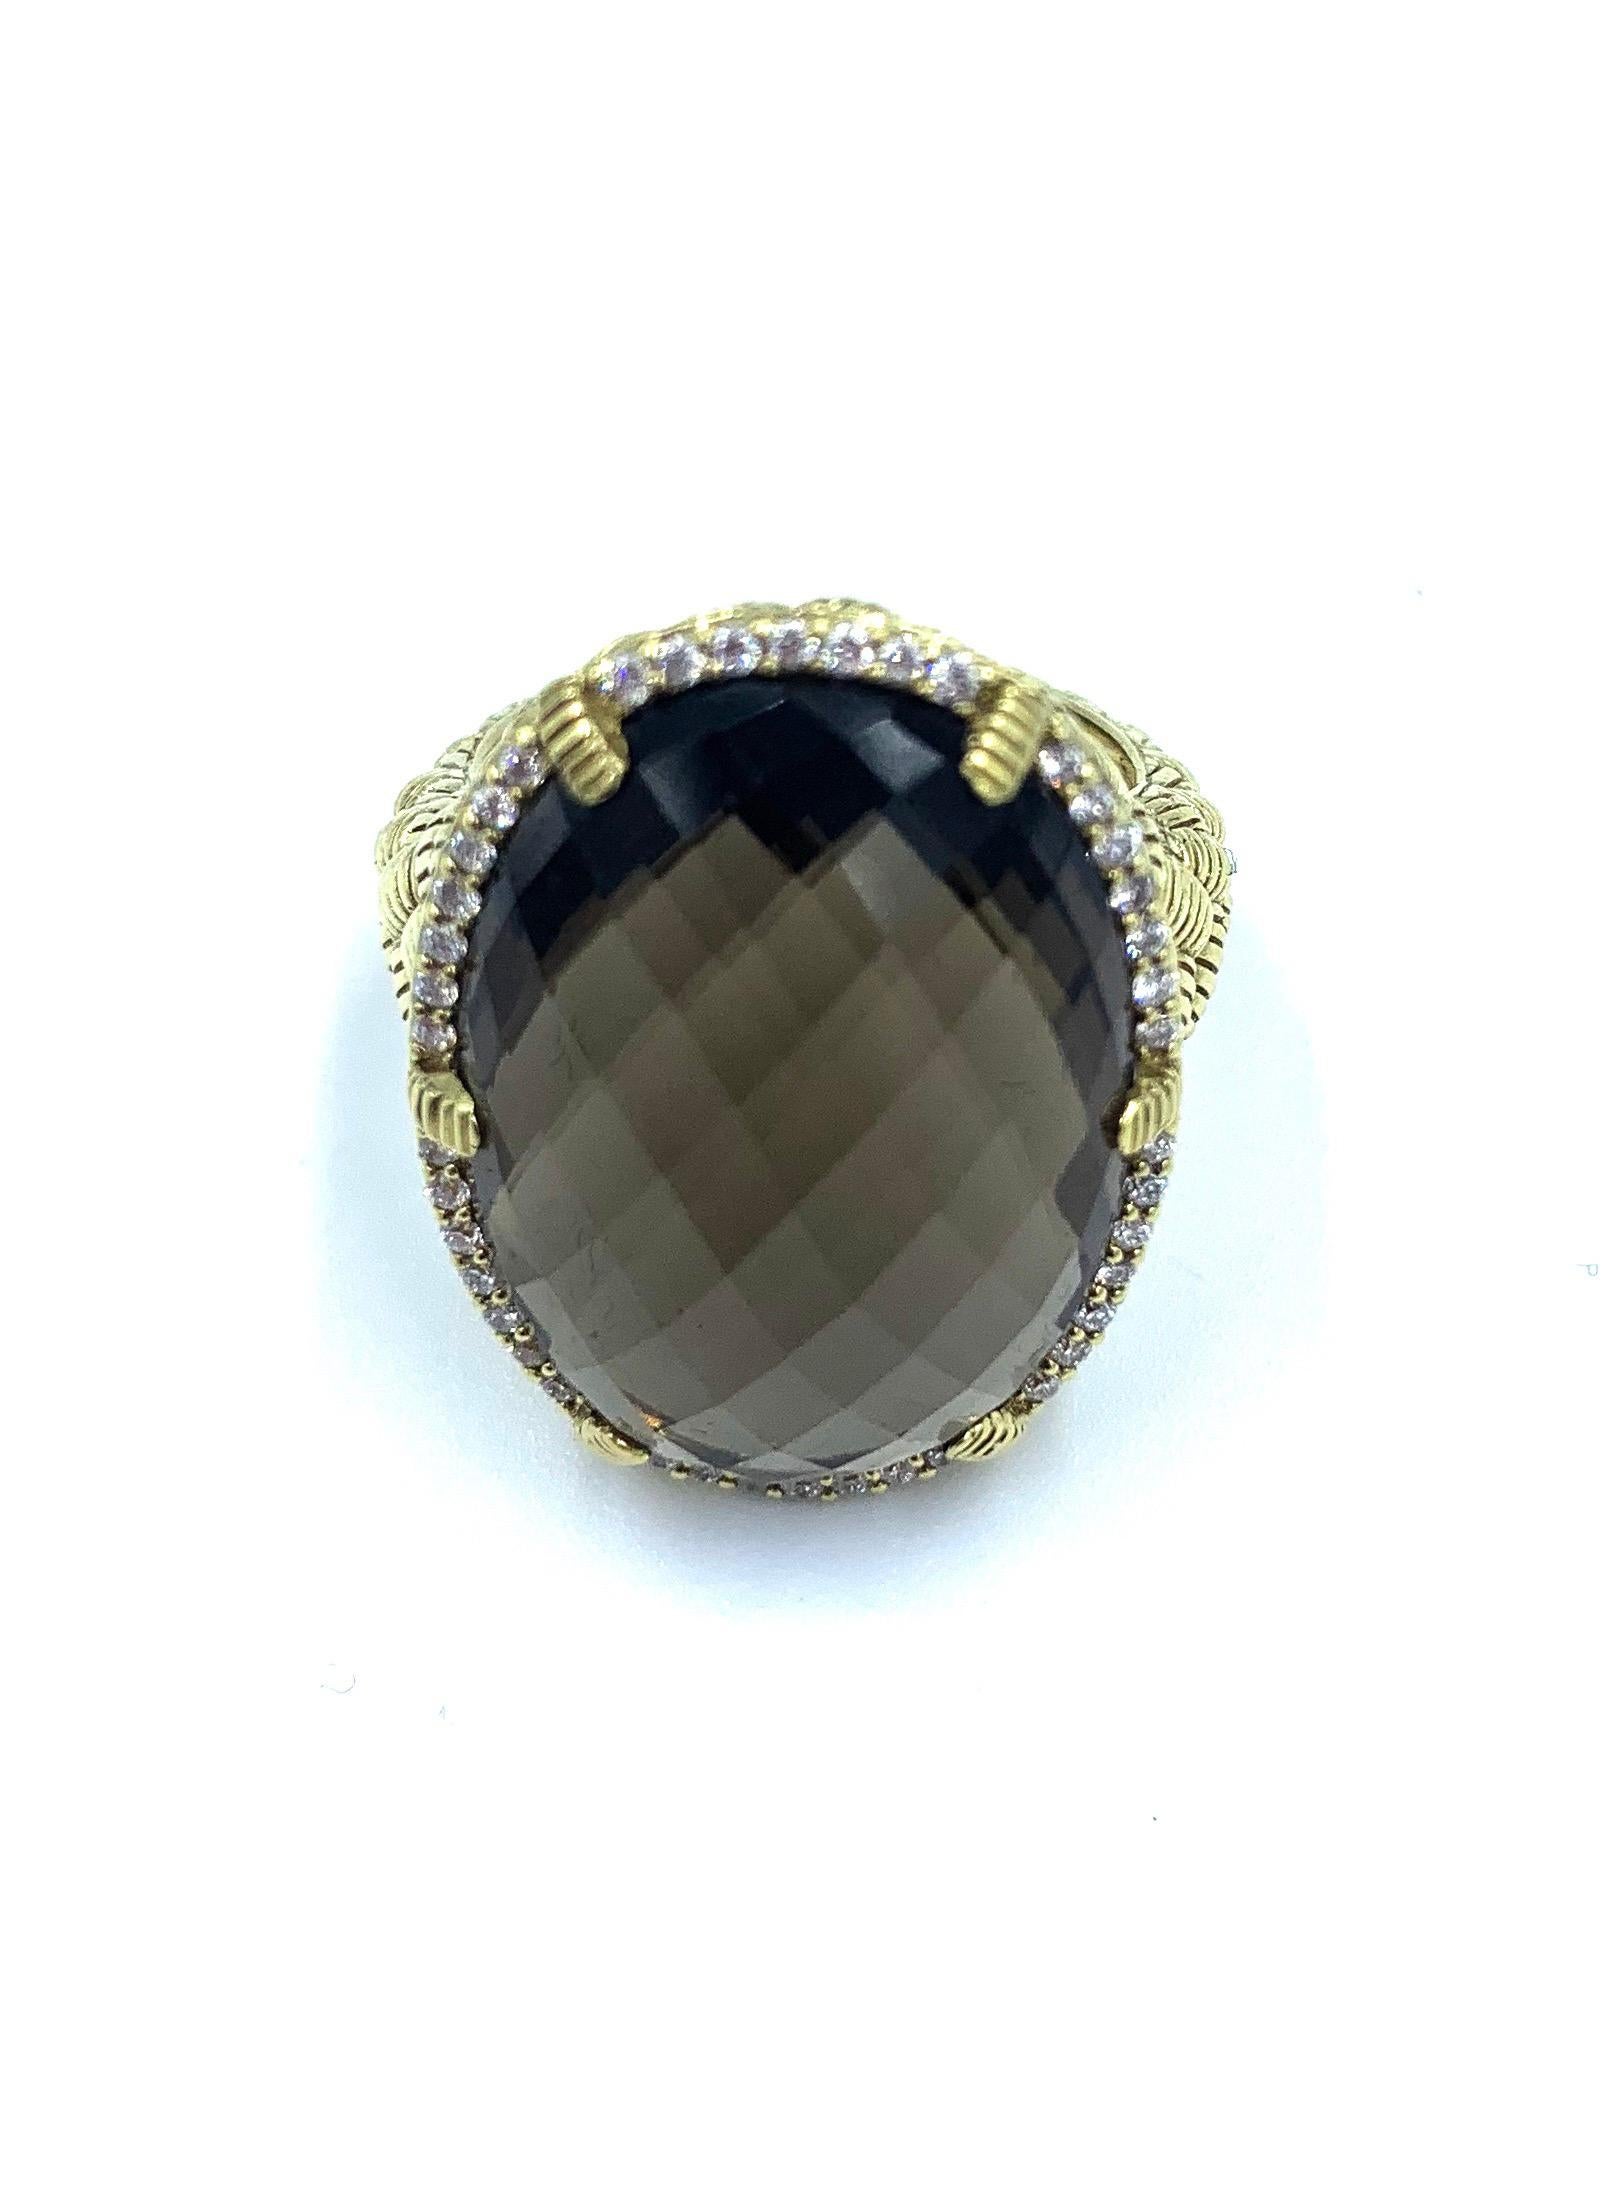 This Briolette Diamond Ring is from the Judith Ripka Fine Jewelry Collection. Set in a braided style 18k yellow gold band, this beautifully faceted briolette gemstone is held in place by 6 gold, ribbed prongs and framed by 0.25cts of round, bead-set